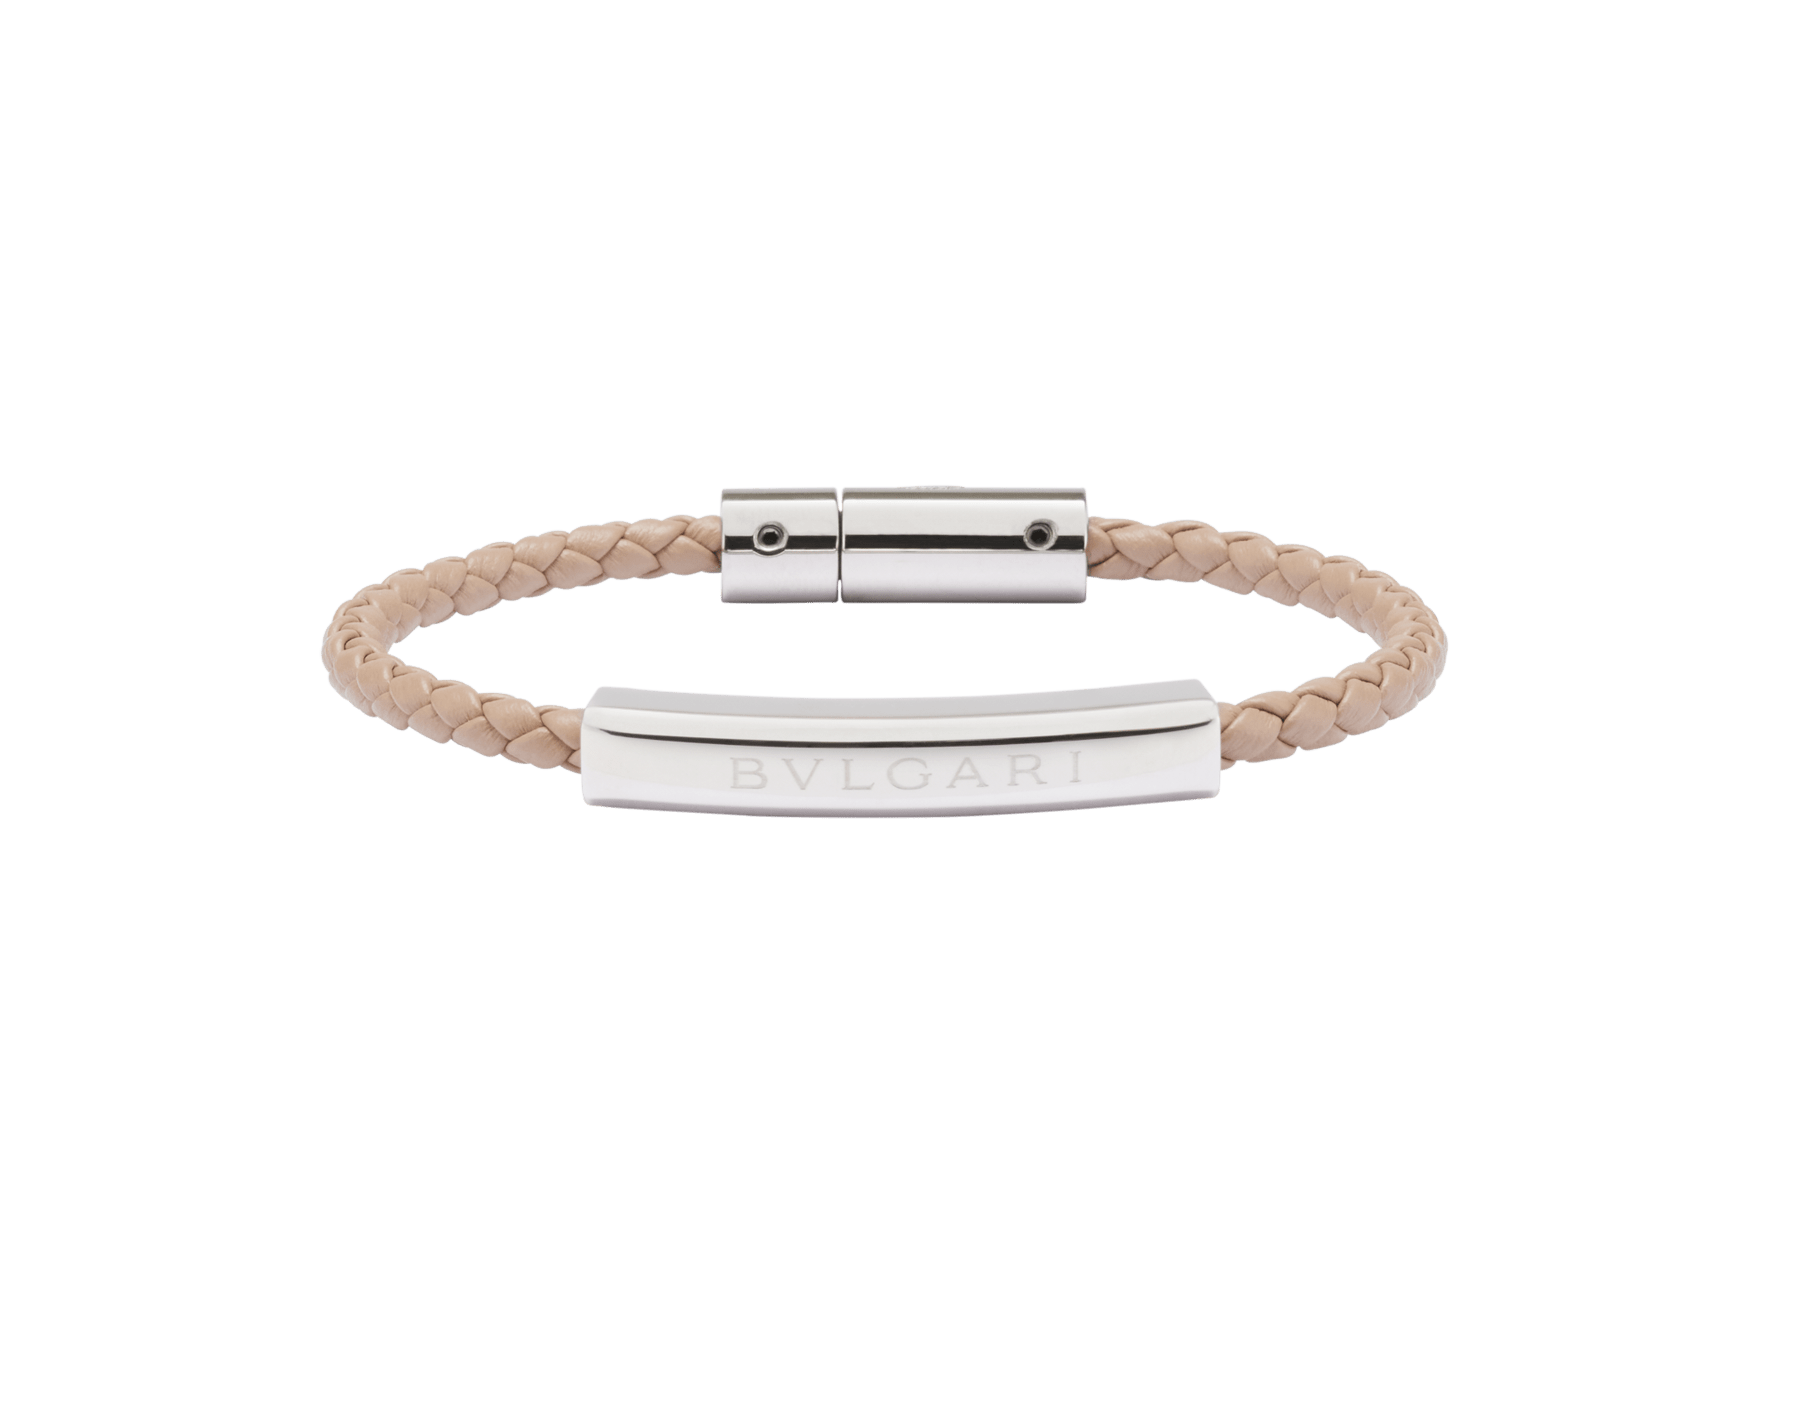 BULGARI BULGARI bracelet in taupe quartz light brown braided calf leather. Silver plate in the middle engraved with iconic BULGARI logo and silver clasp closure. LOGOPLATEW-WCL-TQ image 1